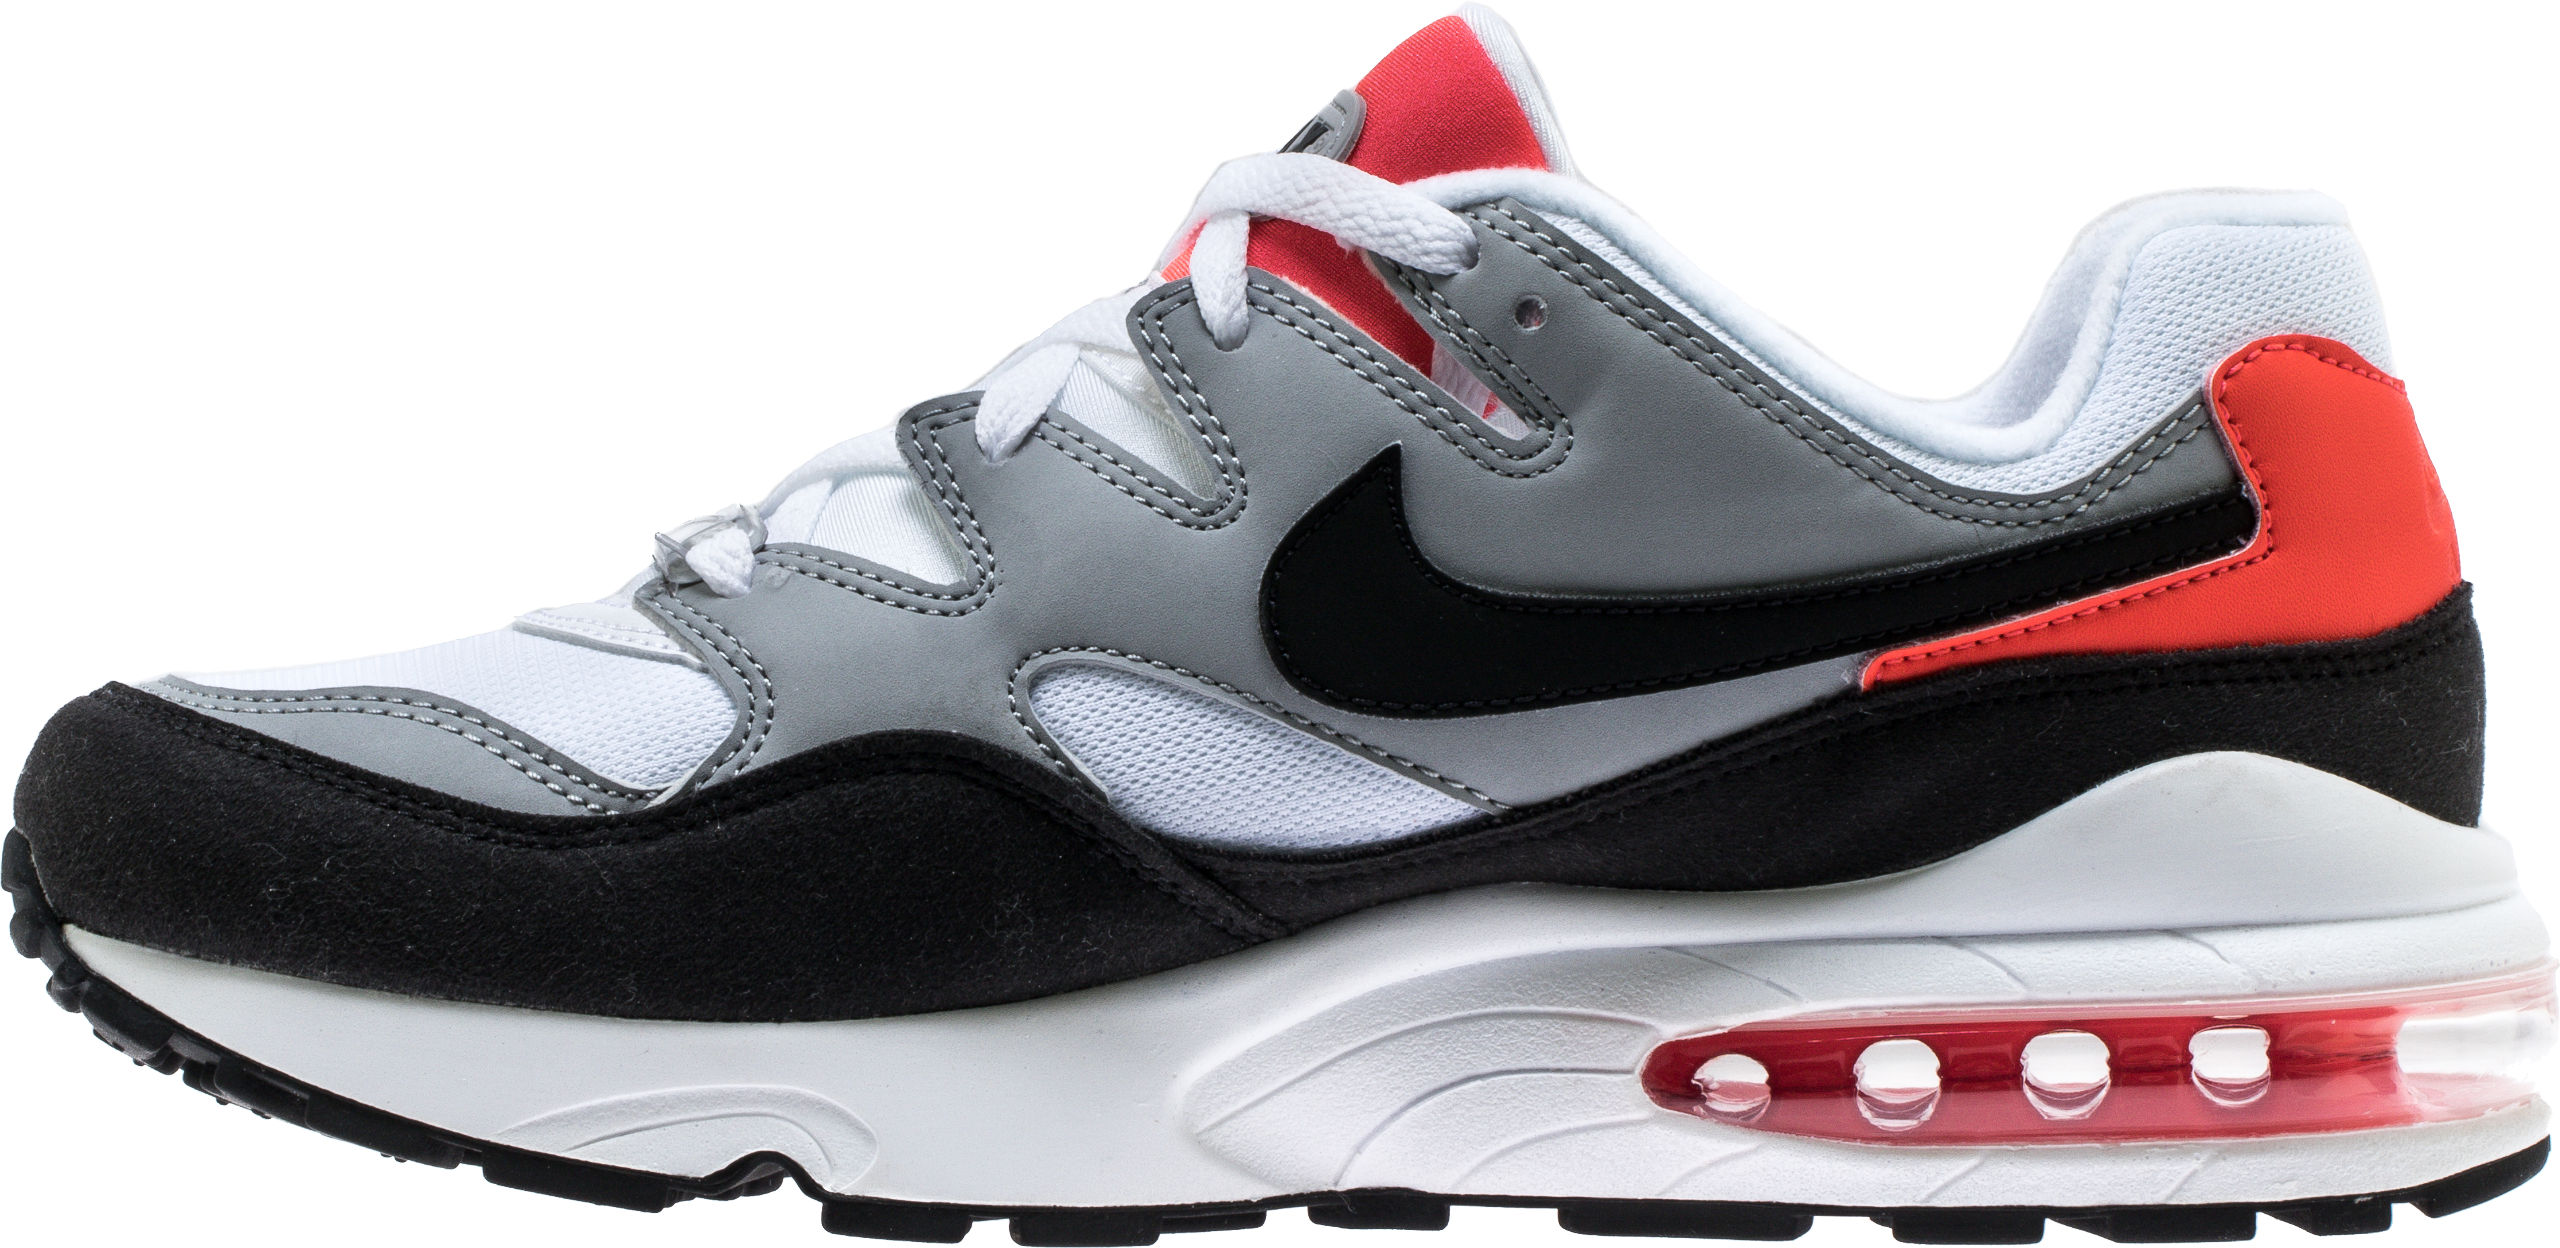 Distraer Adviento cobertura The Nike Air Max 94 Releases Silently in Two Colorways - WearTesters